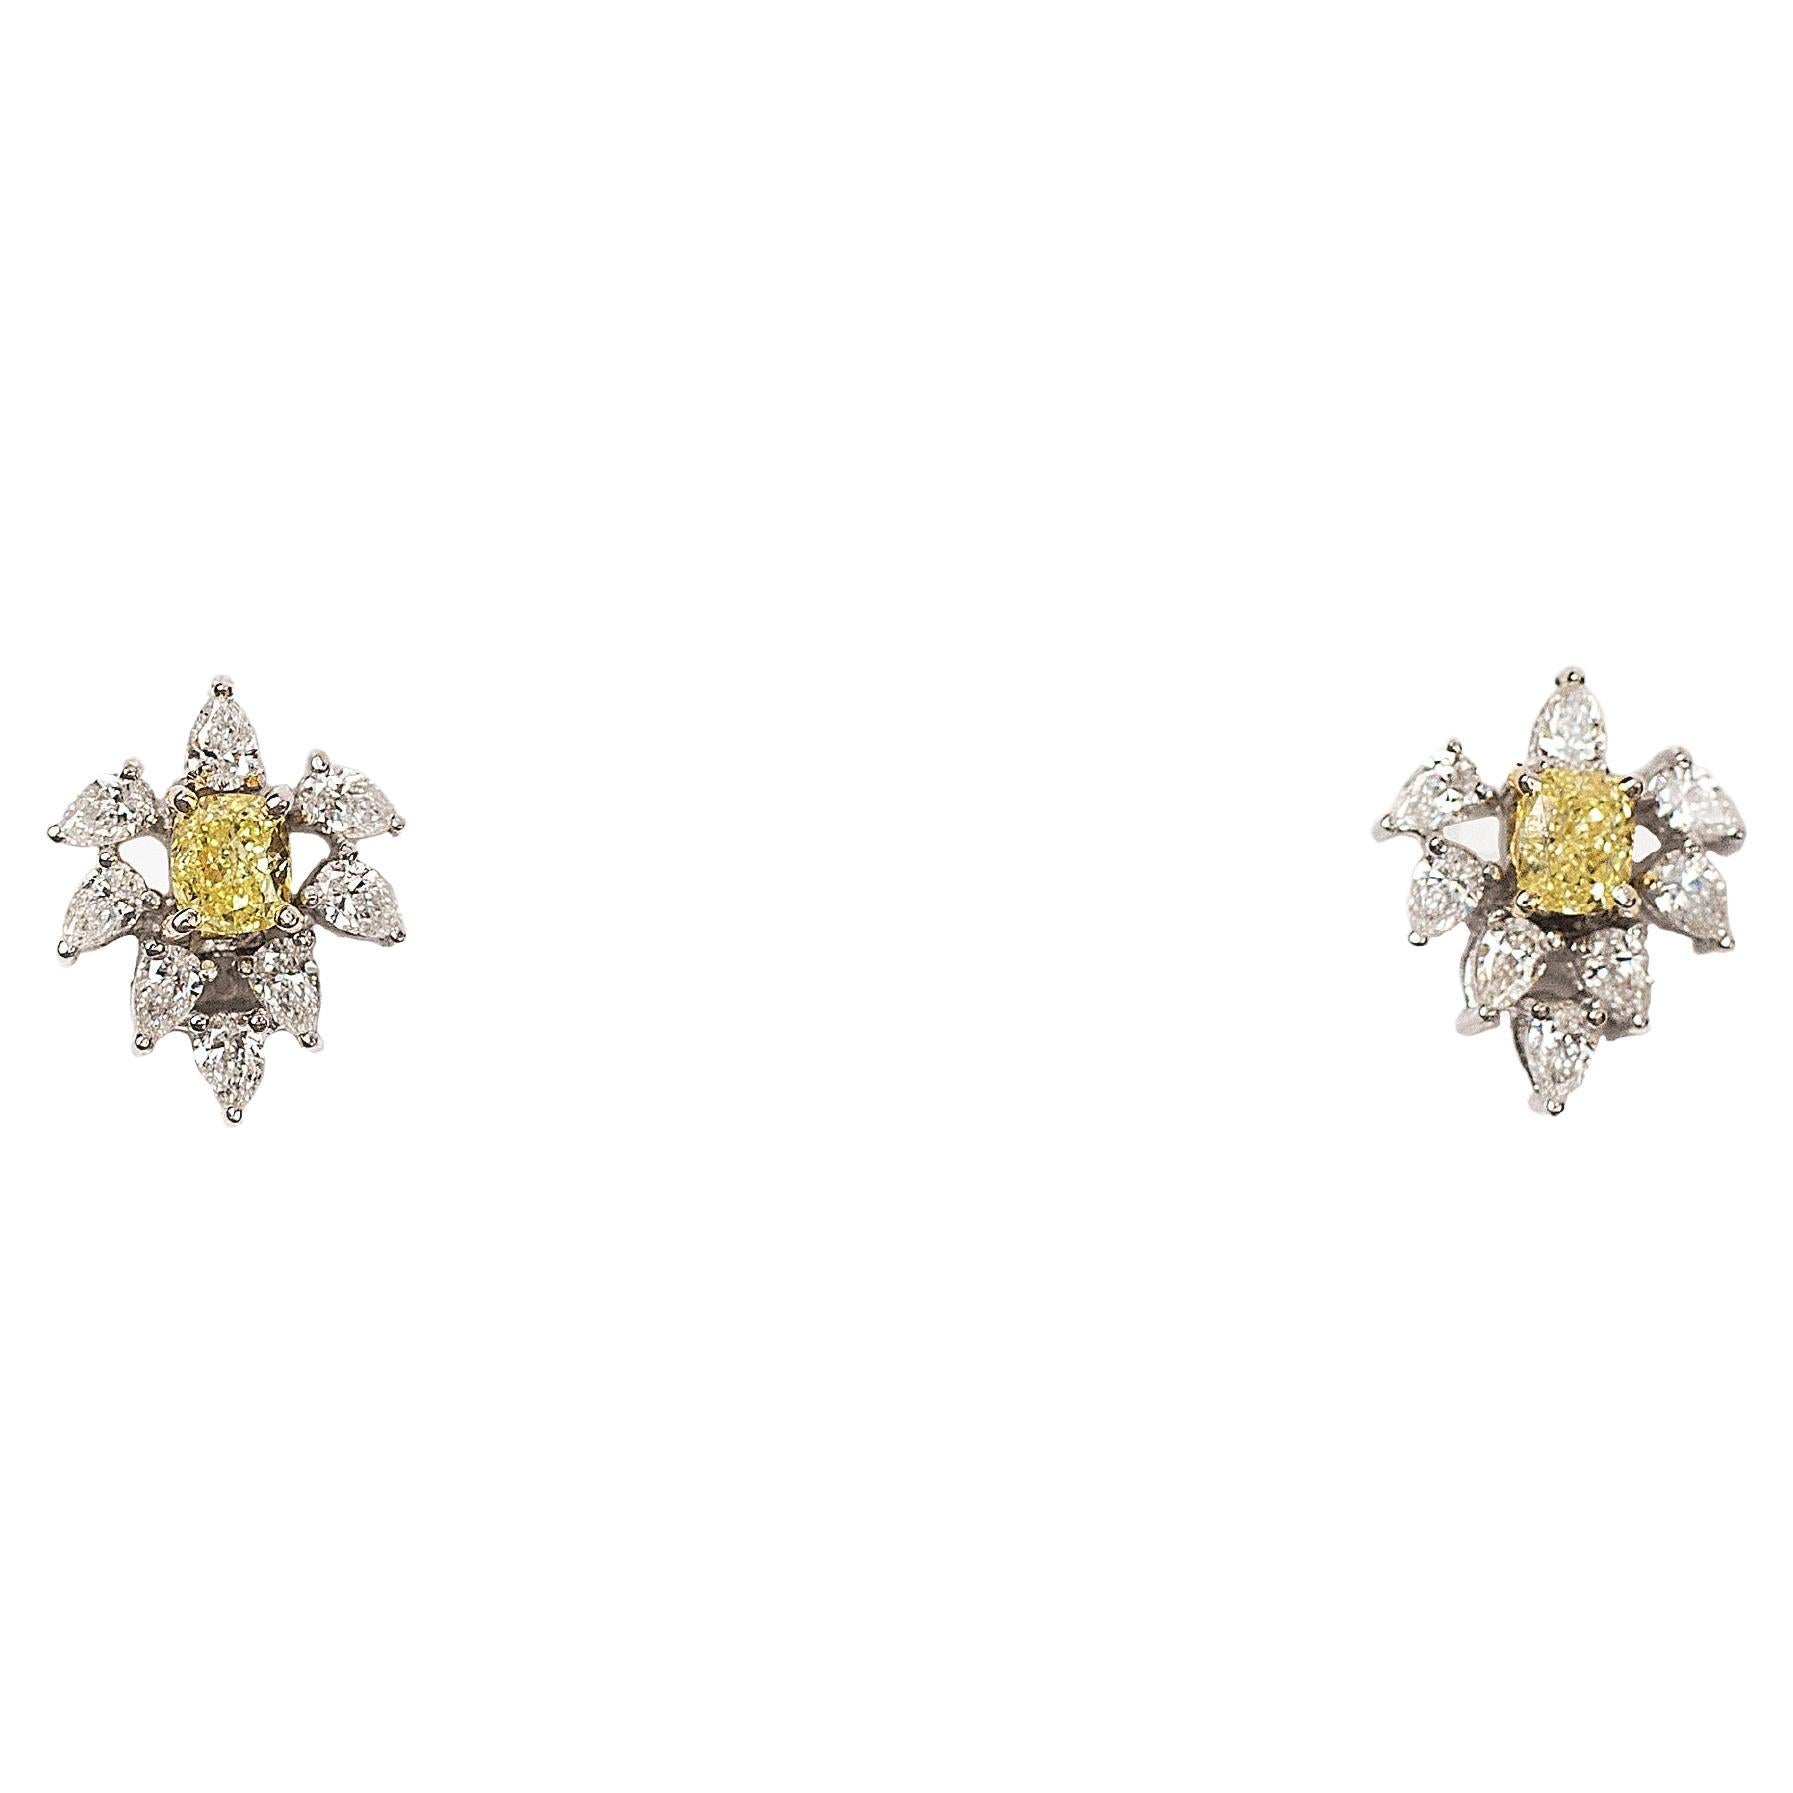 2.36 Cts Earrings Studded with Fancy Yellow Diamond in 18K Gold